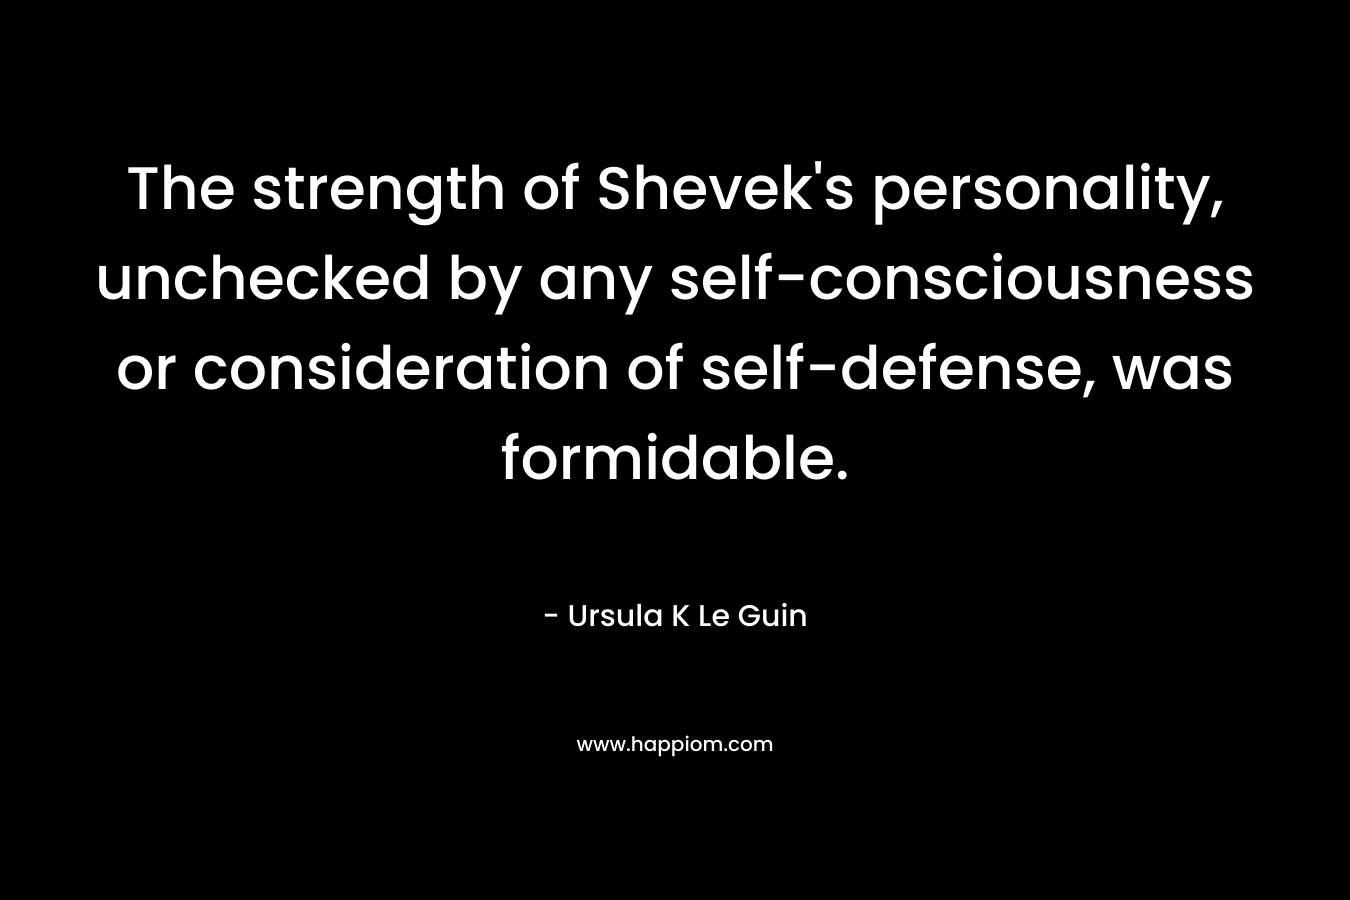 The strength of Shevek's personality, unchecked by any self-consciousness or consideration of self-defense, was formidable.